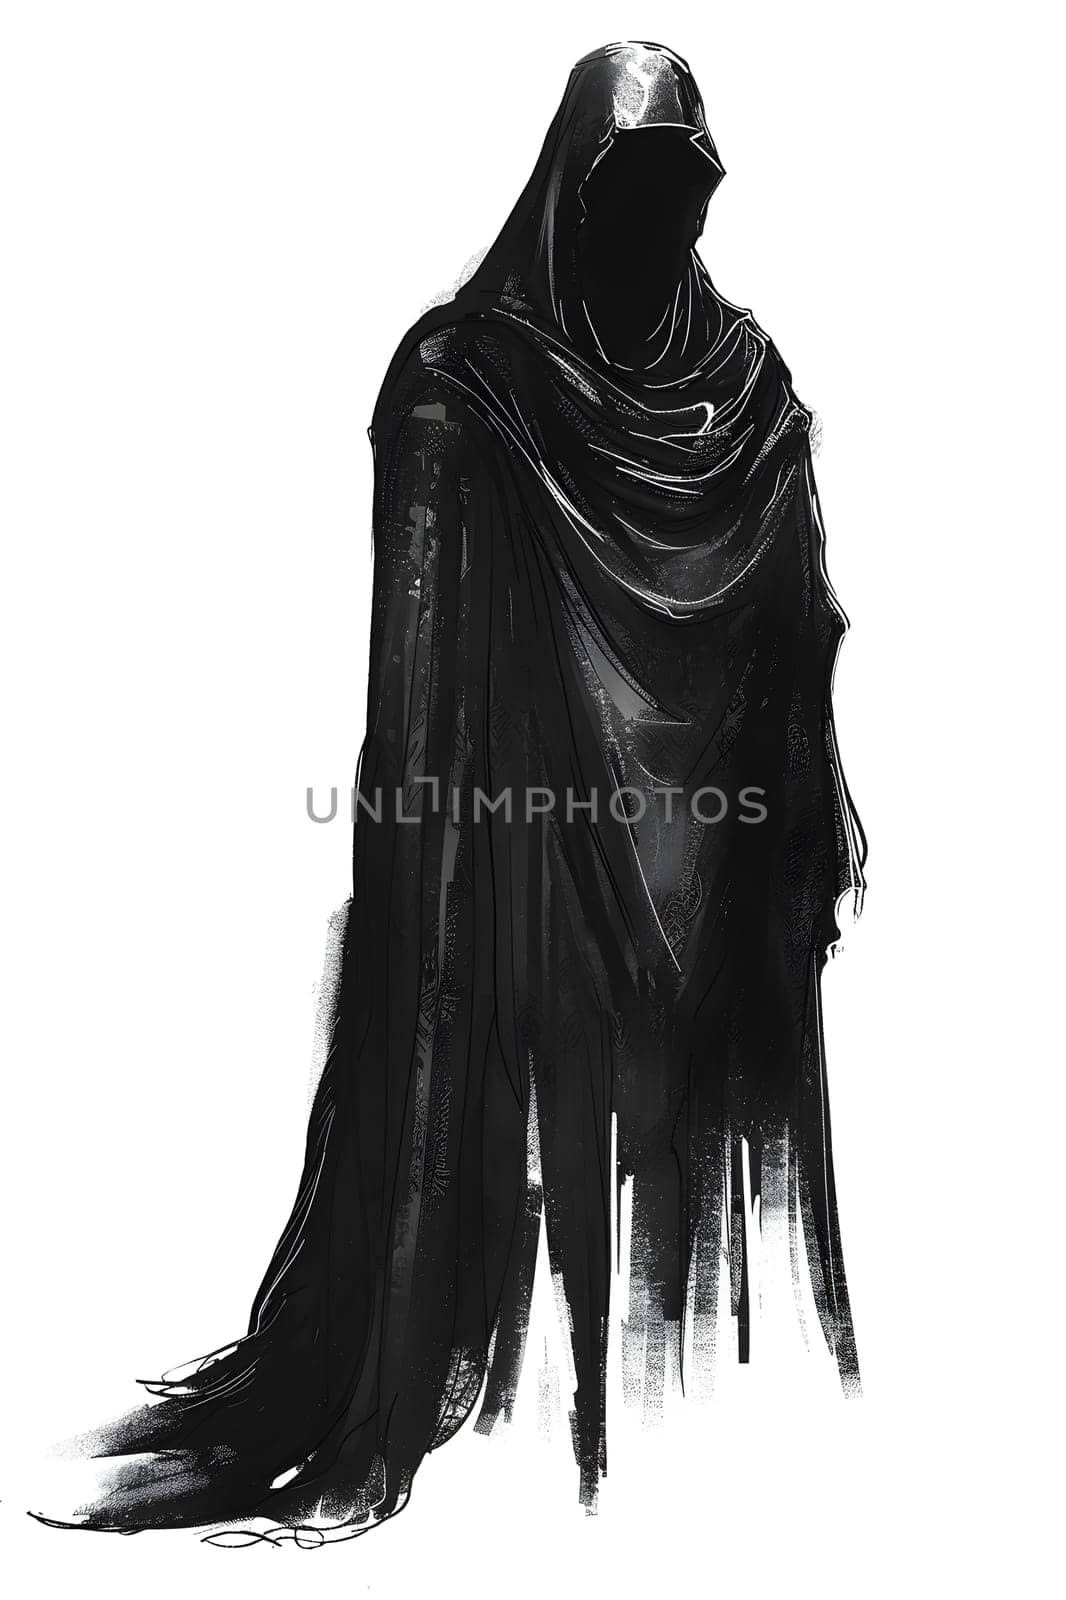 An eerie black and white drawing of a faceless grim reaper in a fur stole, a haunting piece of art perfect for fashion or costume design